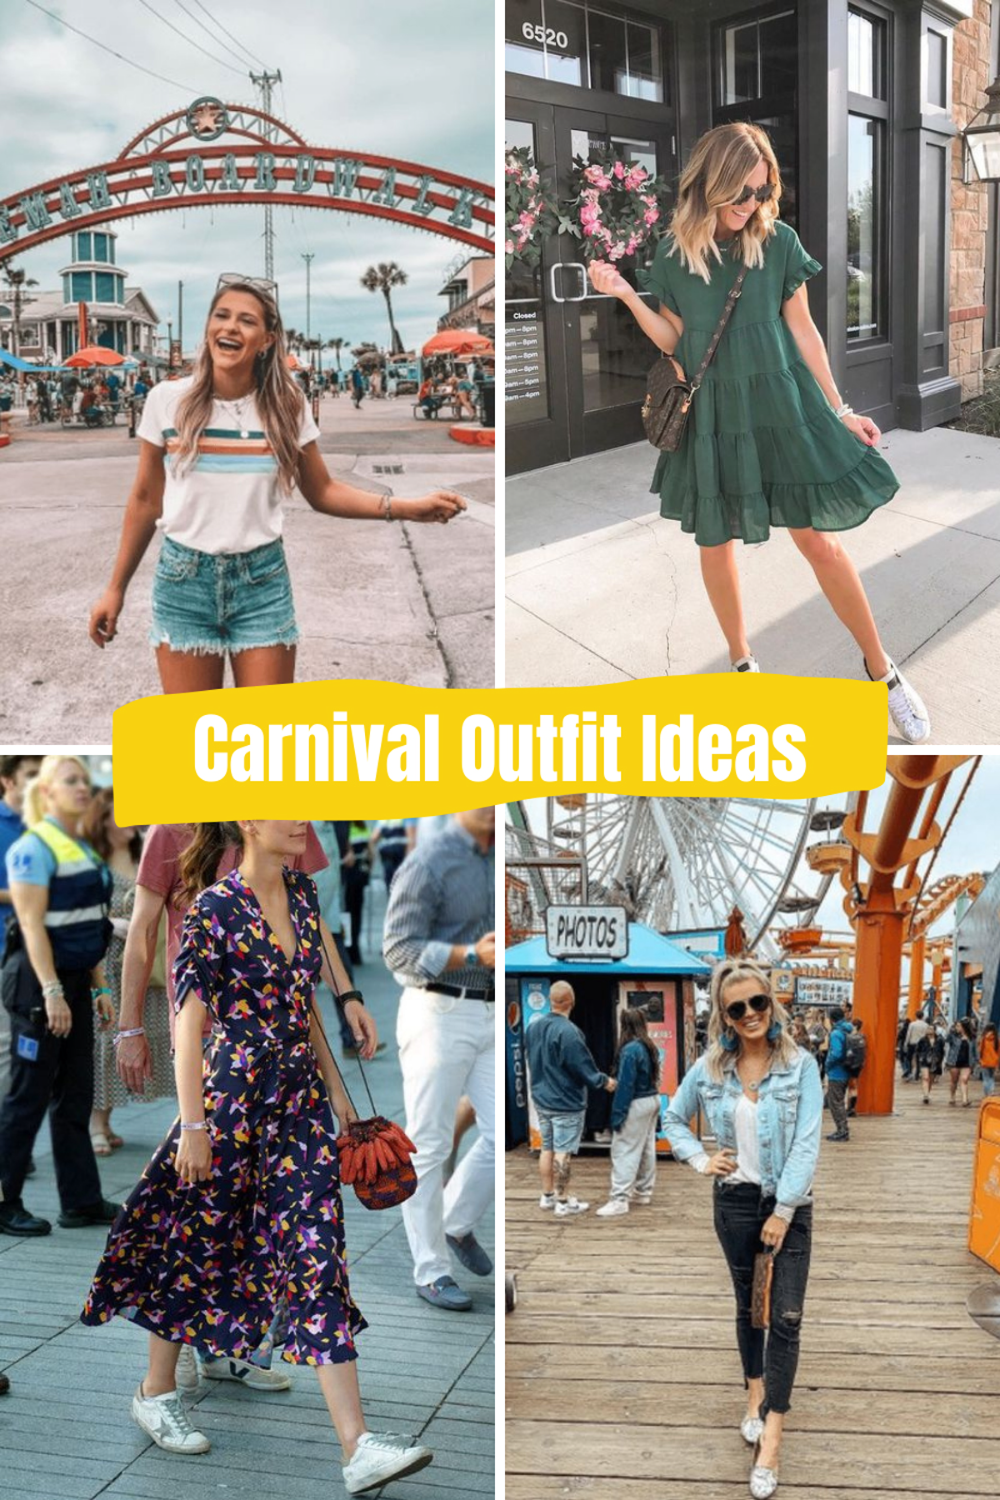 andrew peddle recommends cute outfits to wear to a carnival pic